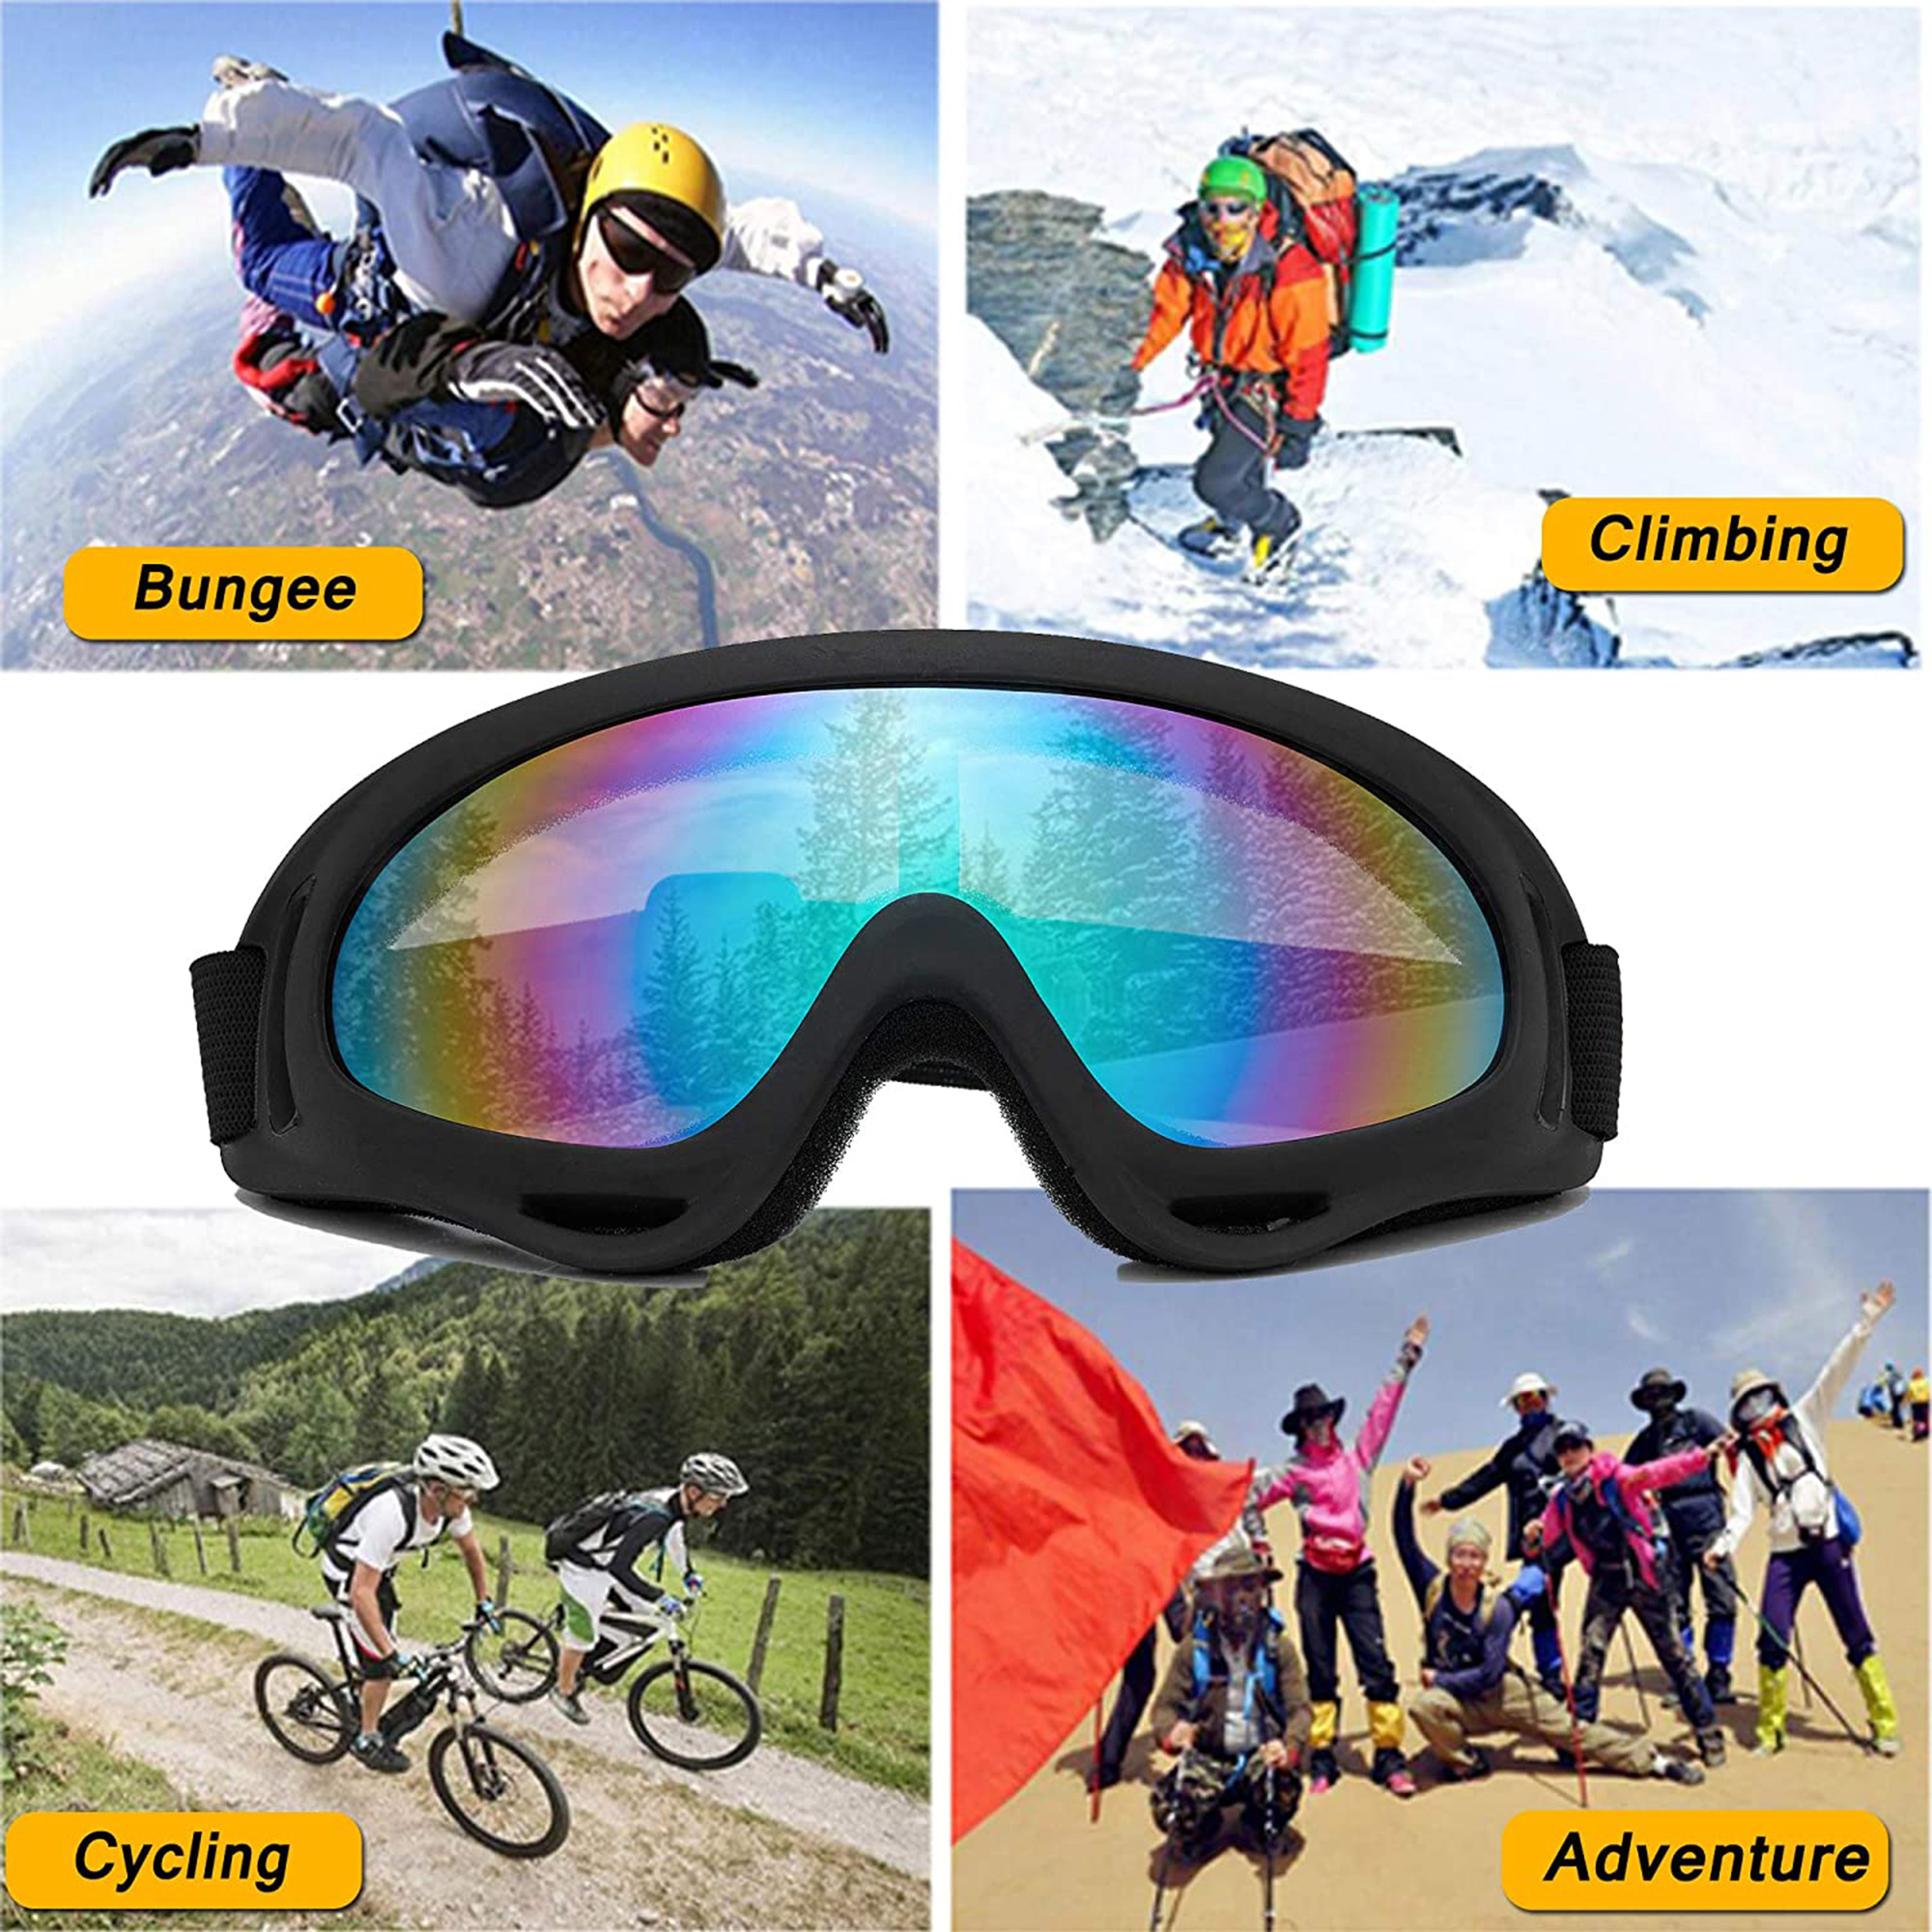 YouLoveIt Ski Goggles, 2-pack Winter Outdoor Sports Goggles Ski Snowboard Goggles Anti-fog UV Protection, Skate Glasses Bicycle Motorcycle Protective Glasses for Men Women Youth - image 2 of 9